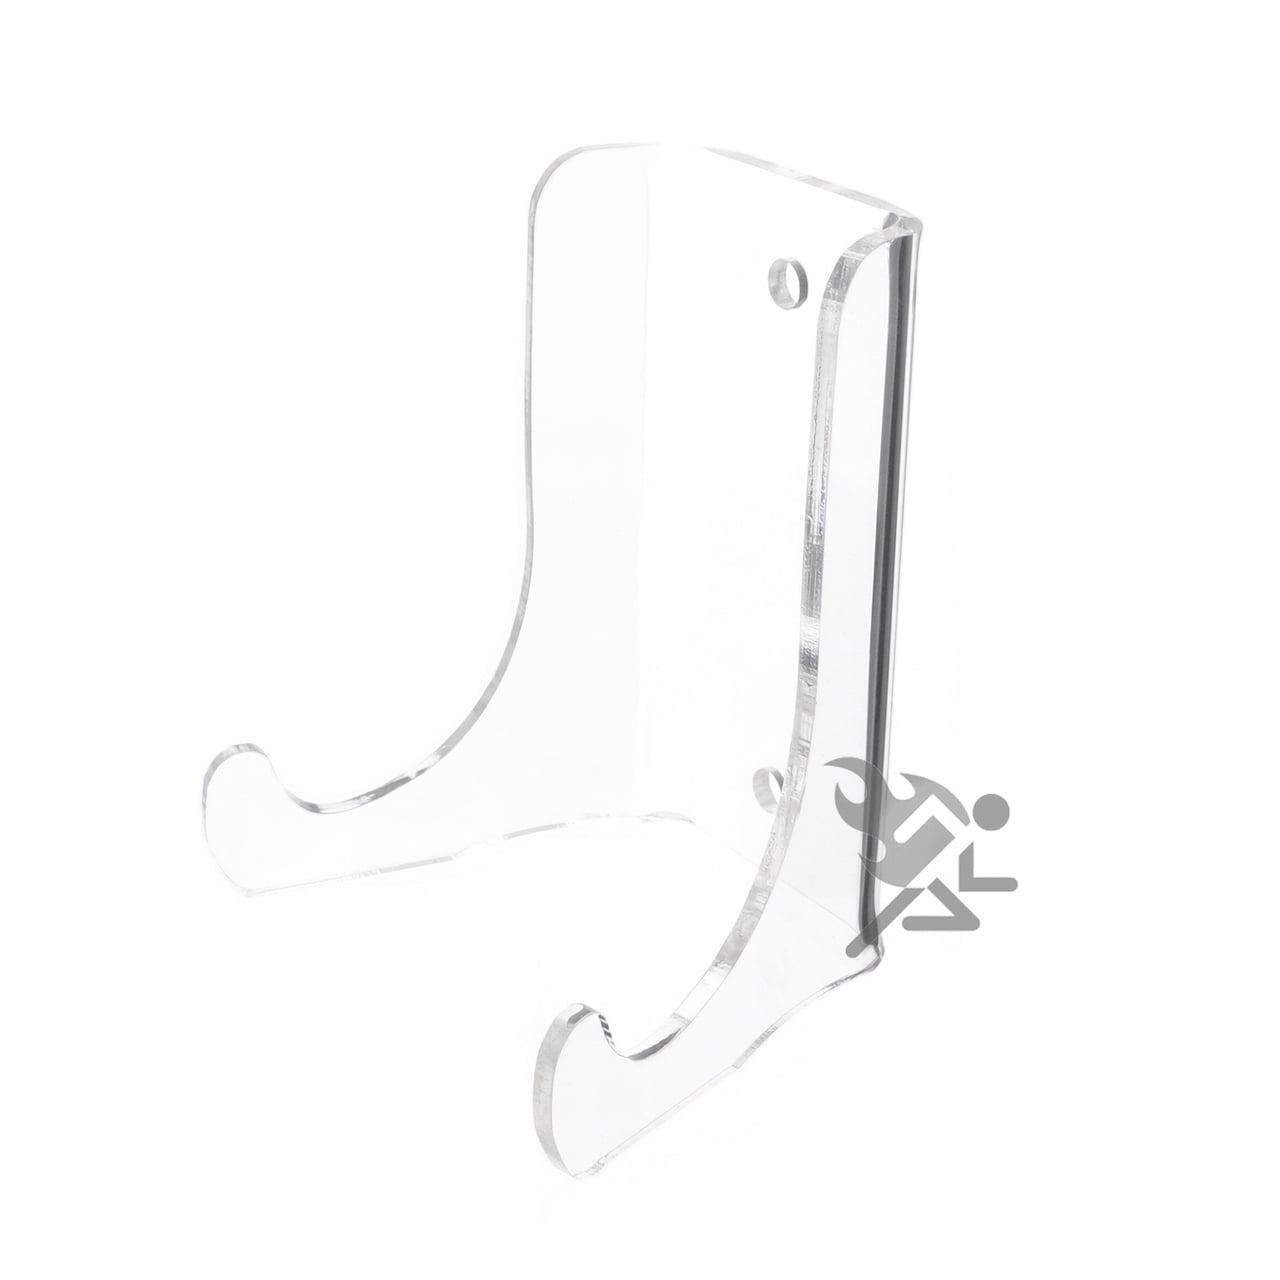 BLACK OR CLEAR CLASSIC PLATE HOLDER PHOTO FRAME PLASTIC DISPLAY STAND RACK EASEL 